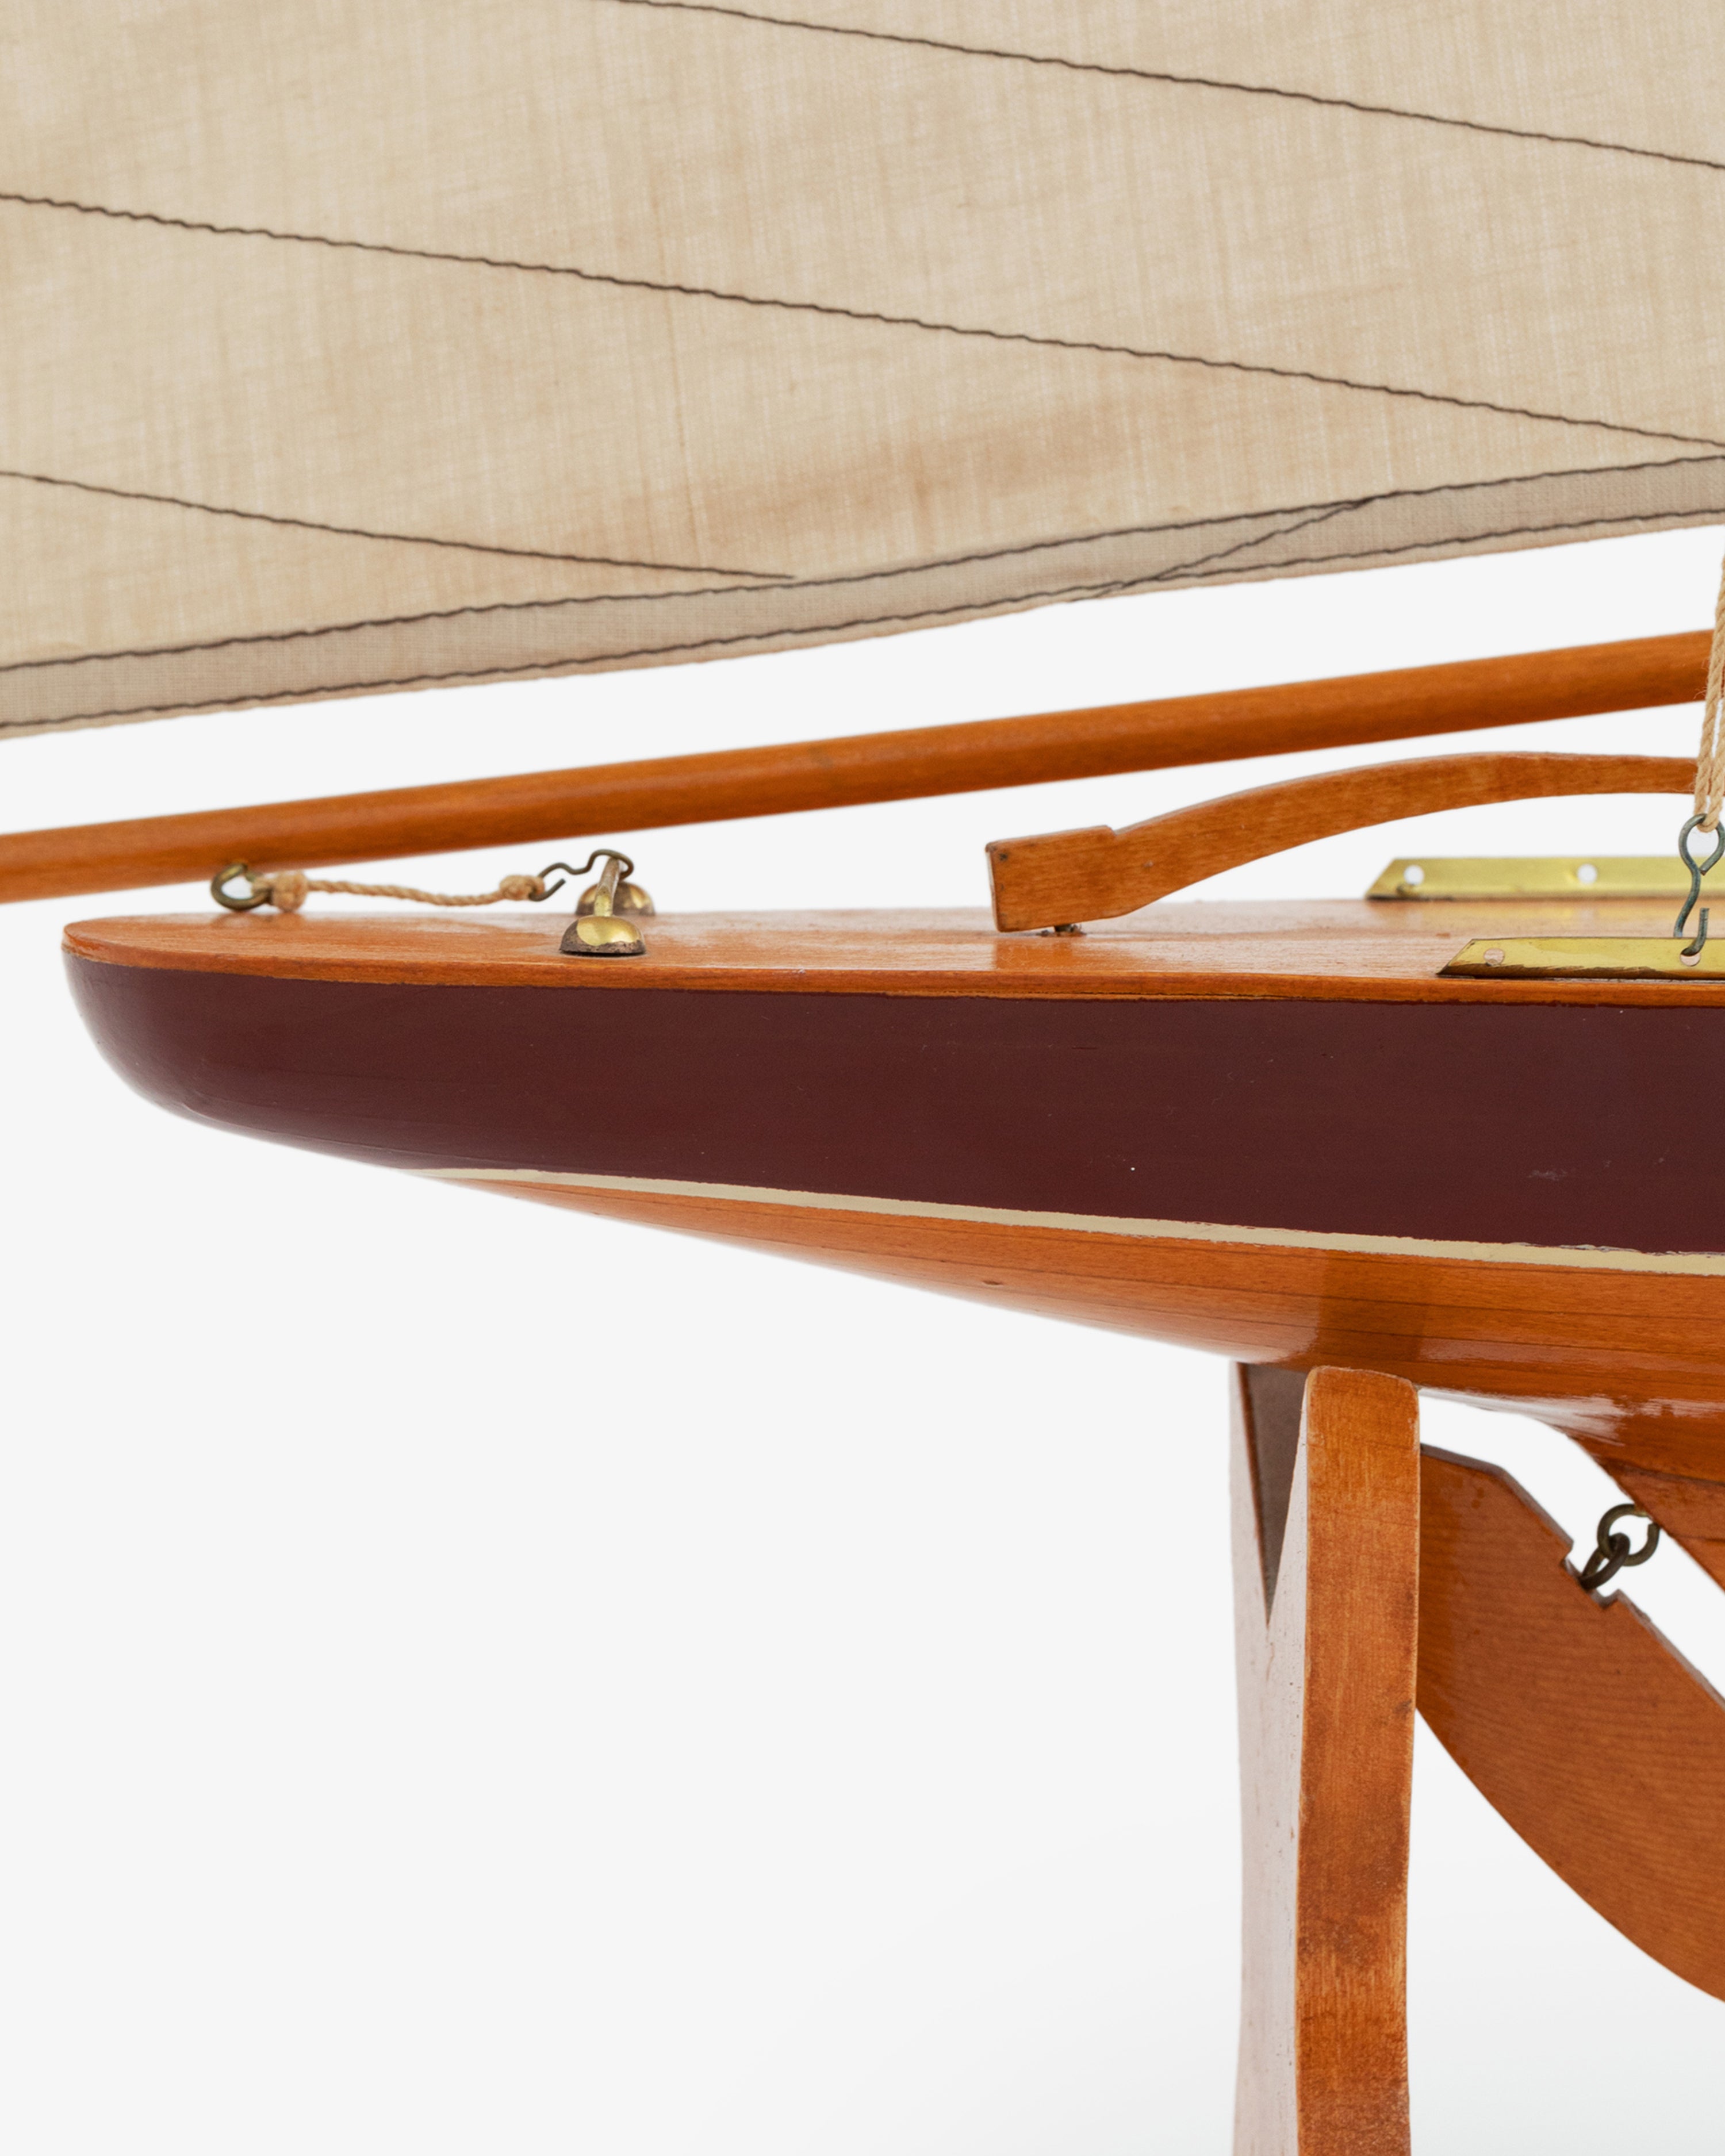 1895 Cup Racer Sailboat Wooden Model